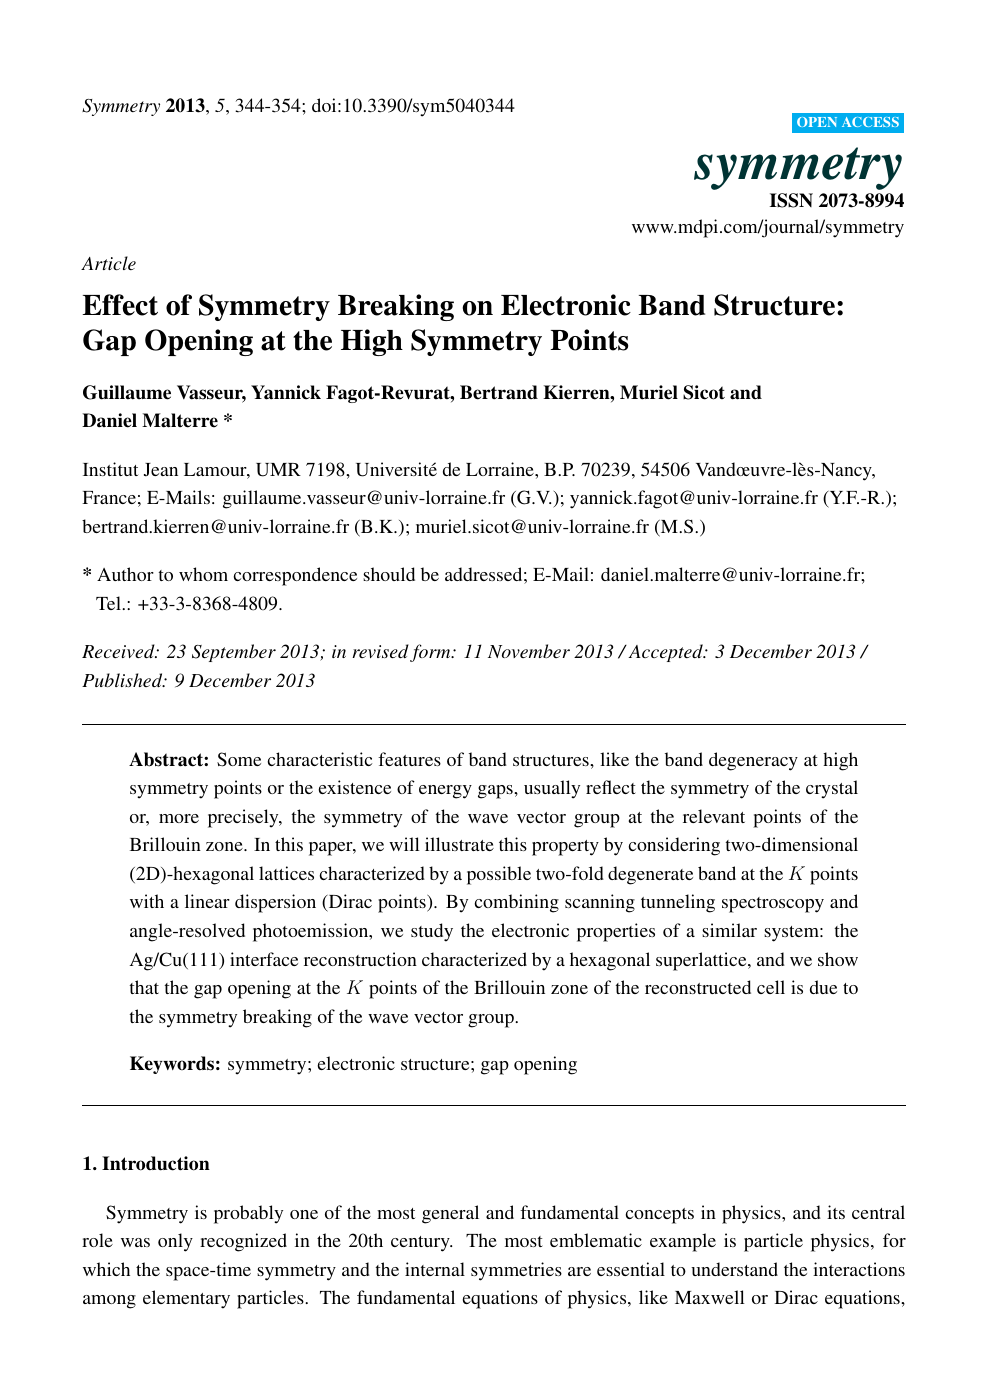 Effect Of Symmetry Breaking On Electronic Band Structure Gap Opening At The High Symmetry Points Topic Of Research Paper In Nano Technology Download Scholarly Article Pdf And Read For Free On Cyberleninka